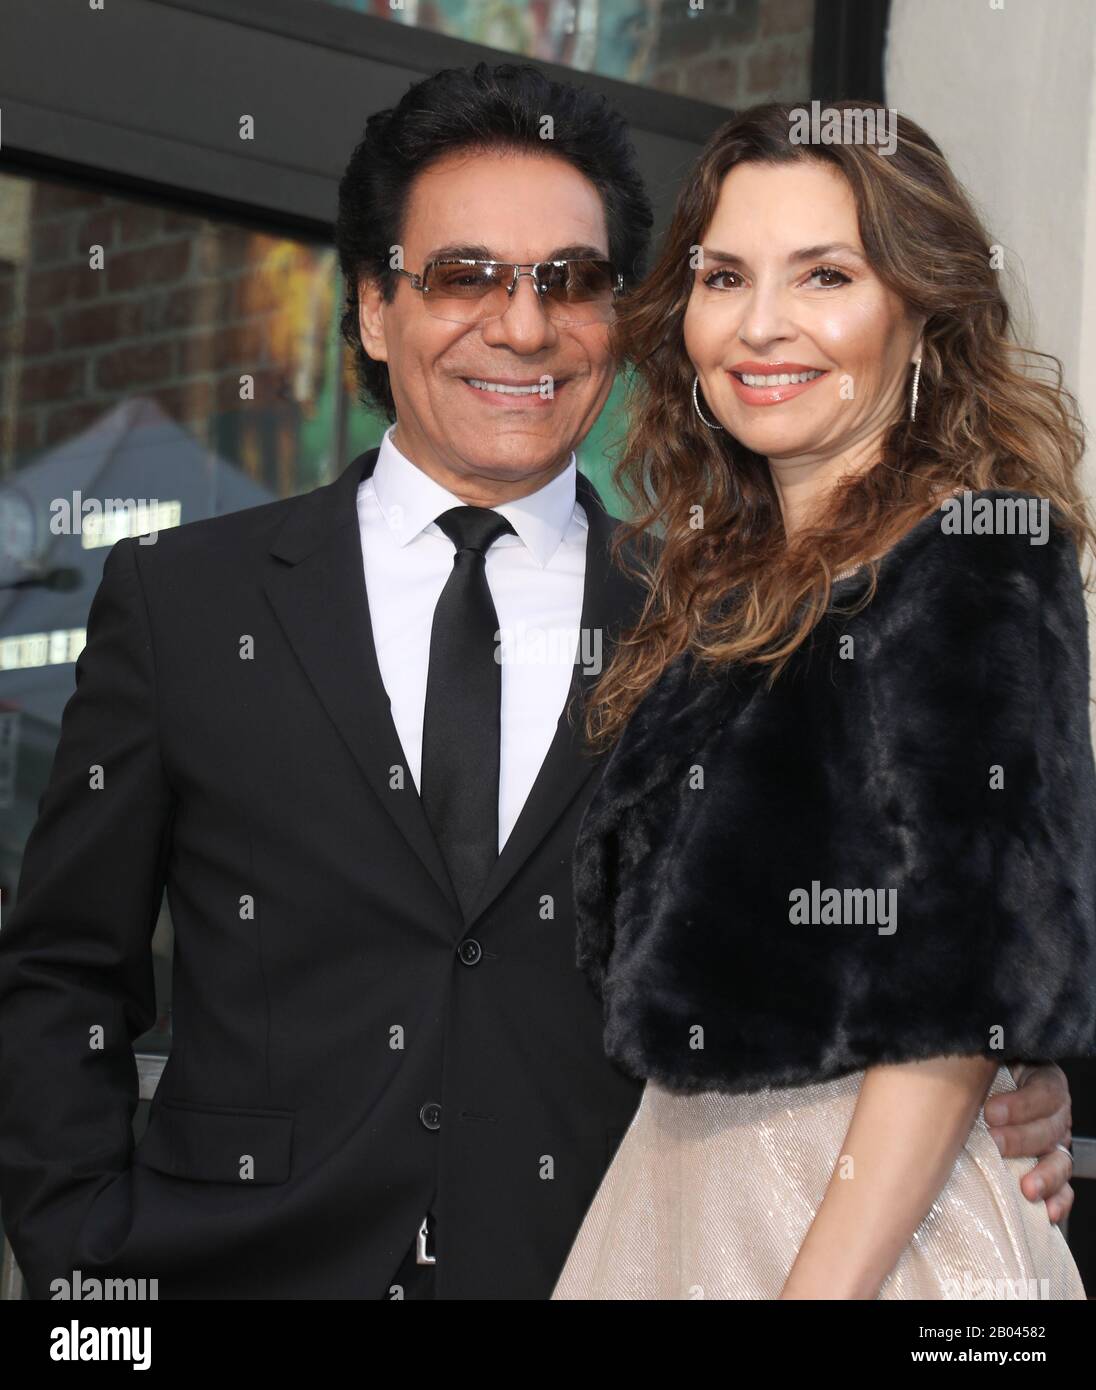 Music artist Andy Madadian was honored with a star on the Hollywood Walk Of Fame in Hollywood, California on January 17, 2020. Featuring: Andy Madadian, Shani Rigsbee Where: Hollywood, California, United States When: 17 Jan 2020 Credit: Sheri Determan/WENN.com Stock Photo